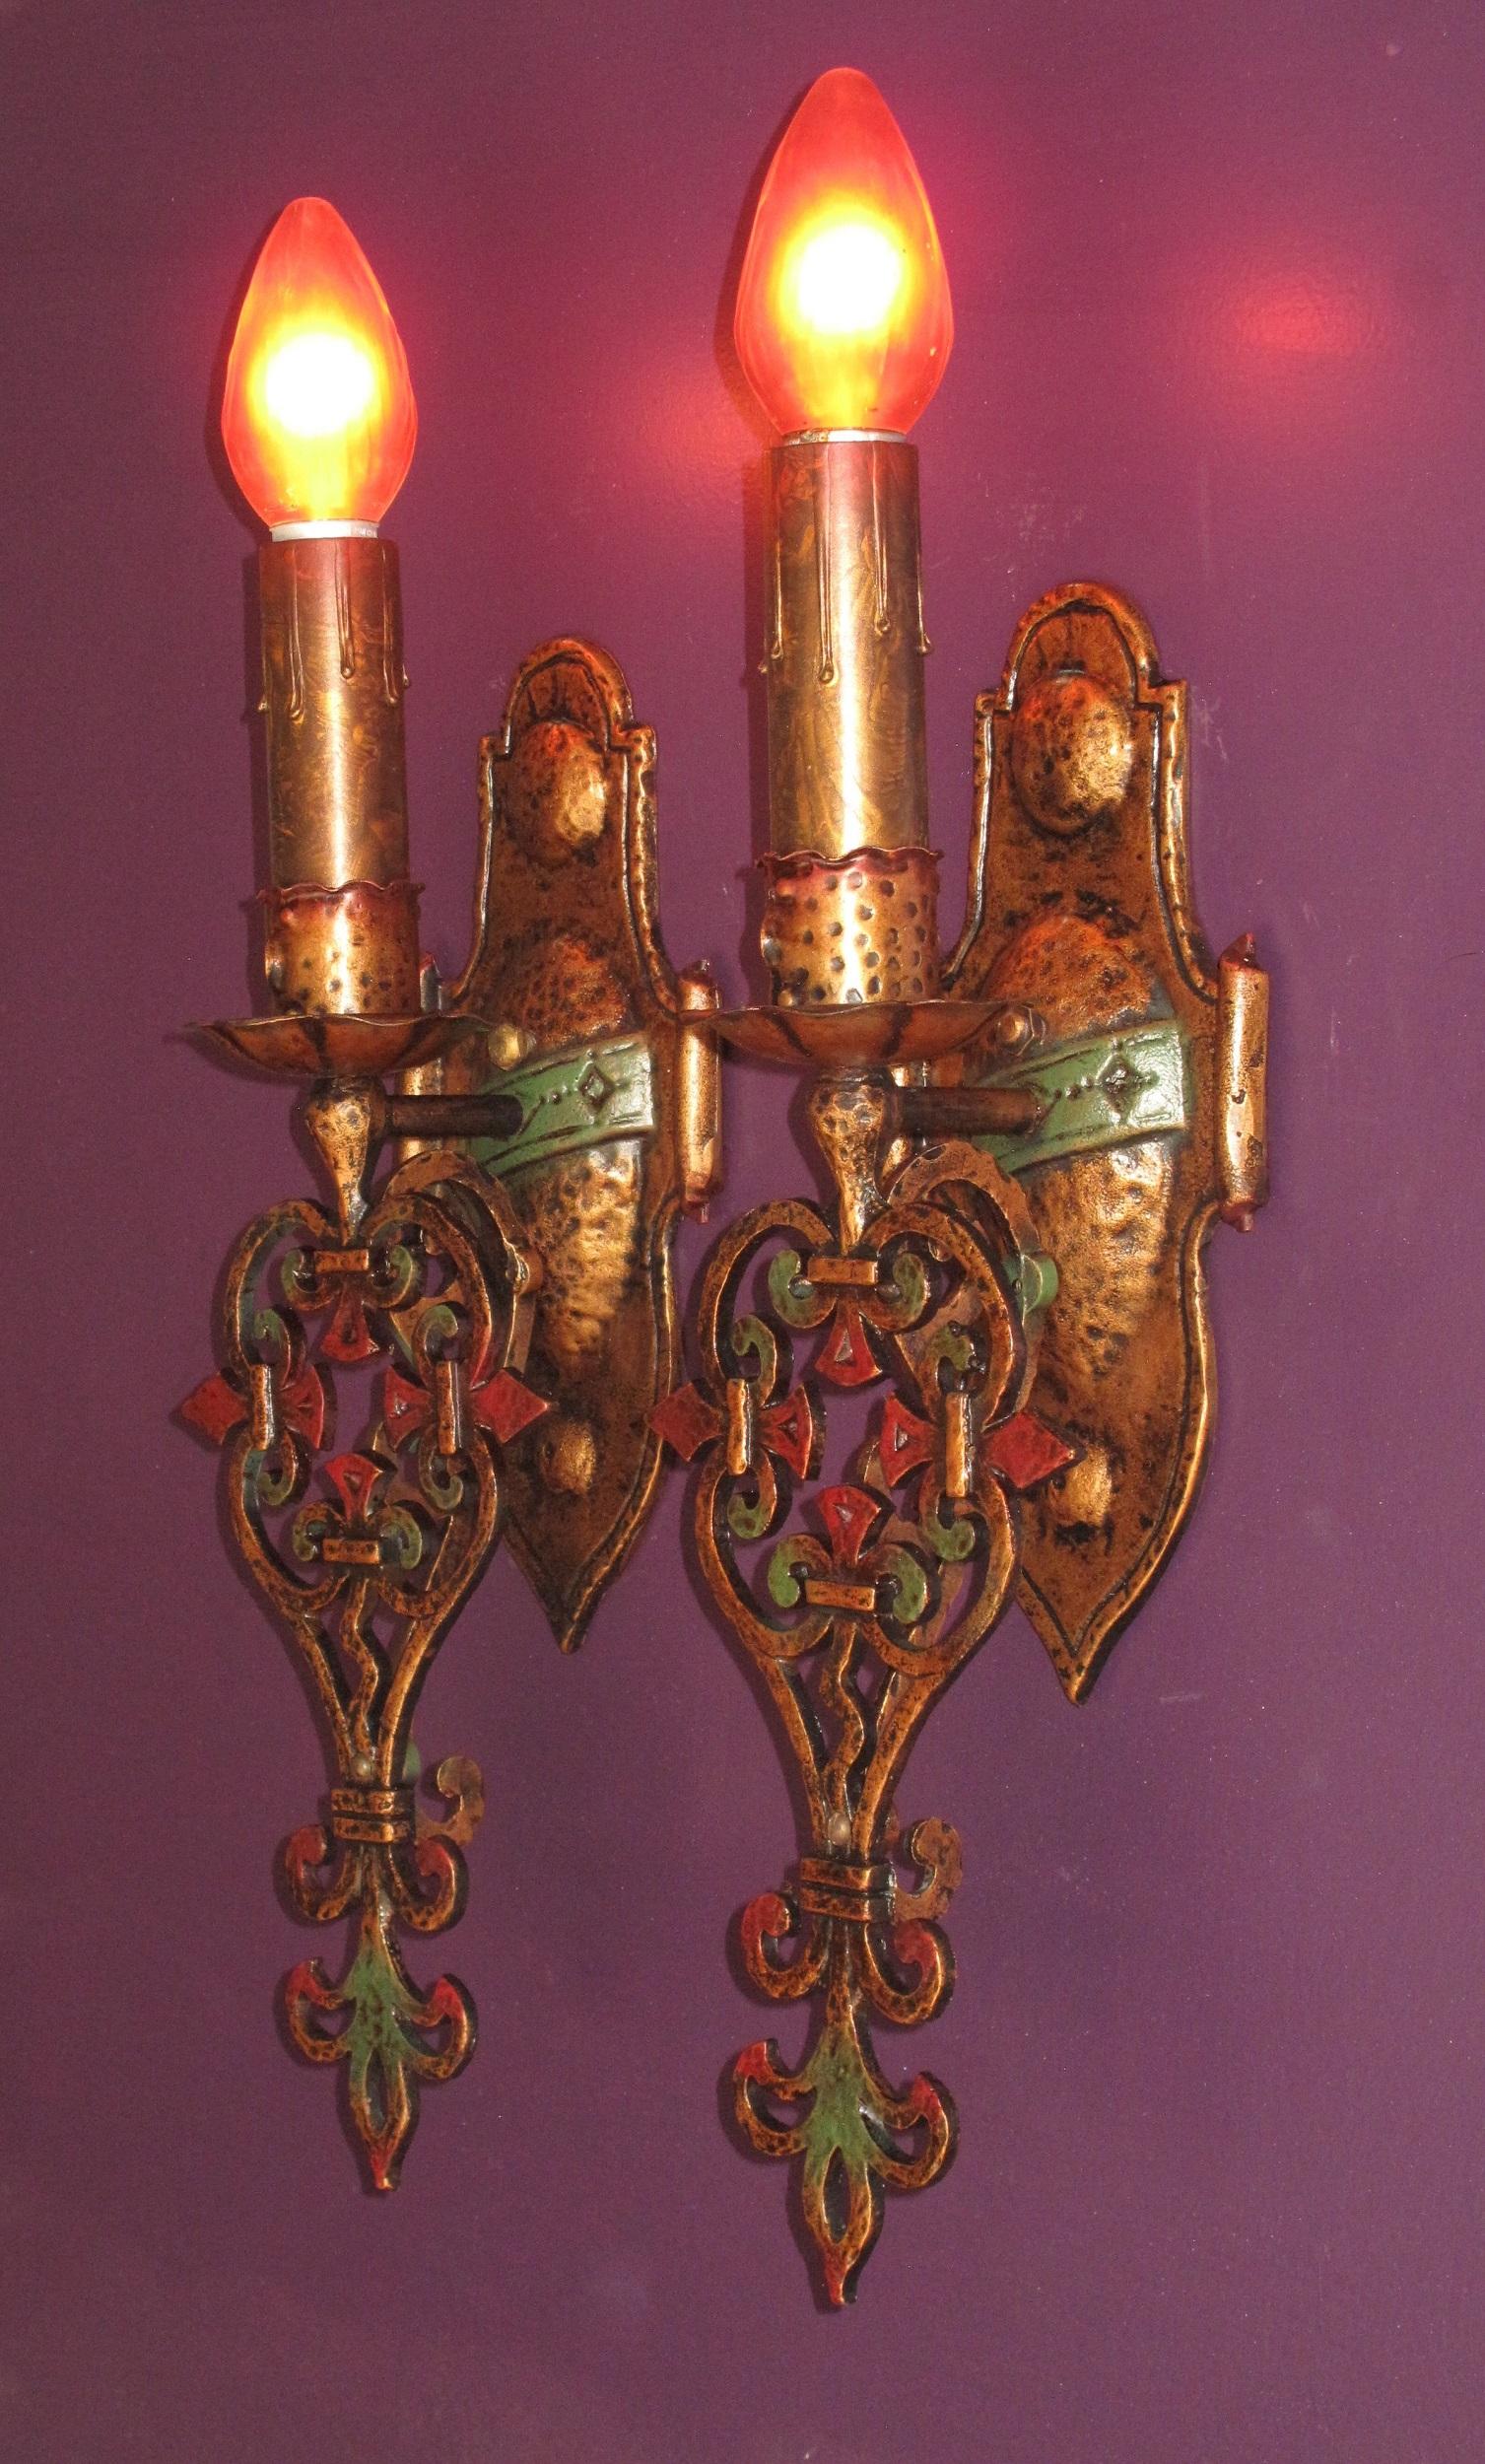 Set of 6 (not 4)  large and impressive 1920s Spanish Revival sconces painstakingly restored 